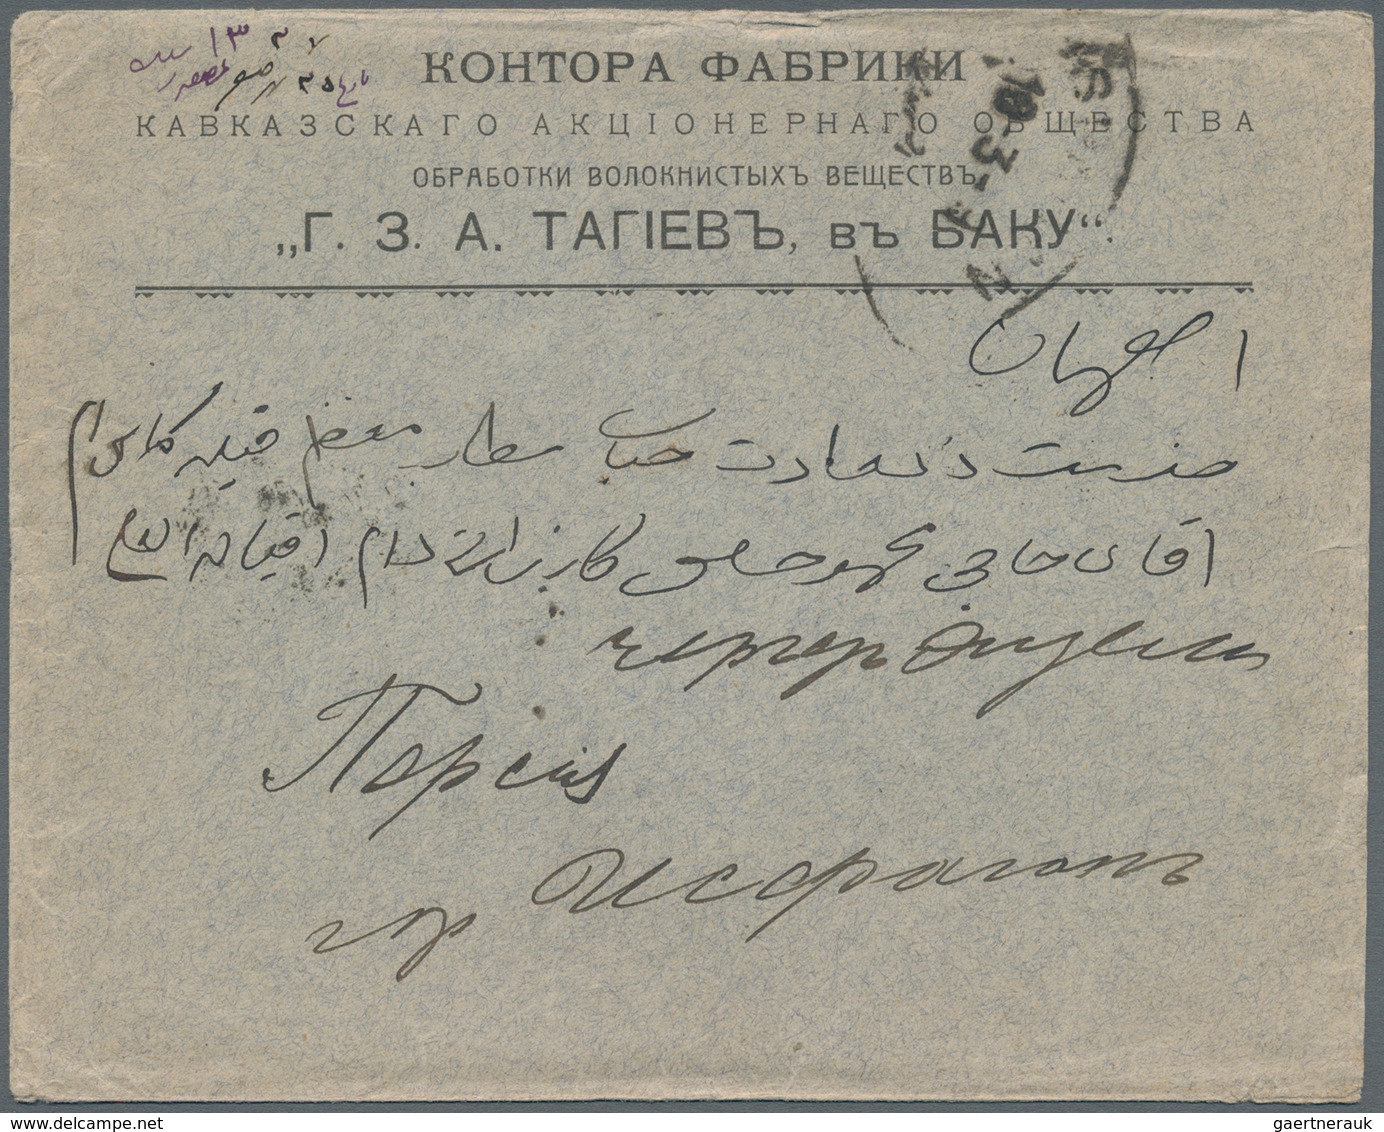 Aserbaidschan (Azerbaydjan): 1920 Ca. Commecial Cover With Imprint Of Baku Used With Russia 10 Kop. - Aserbaidschan